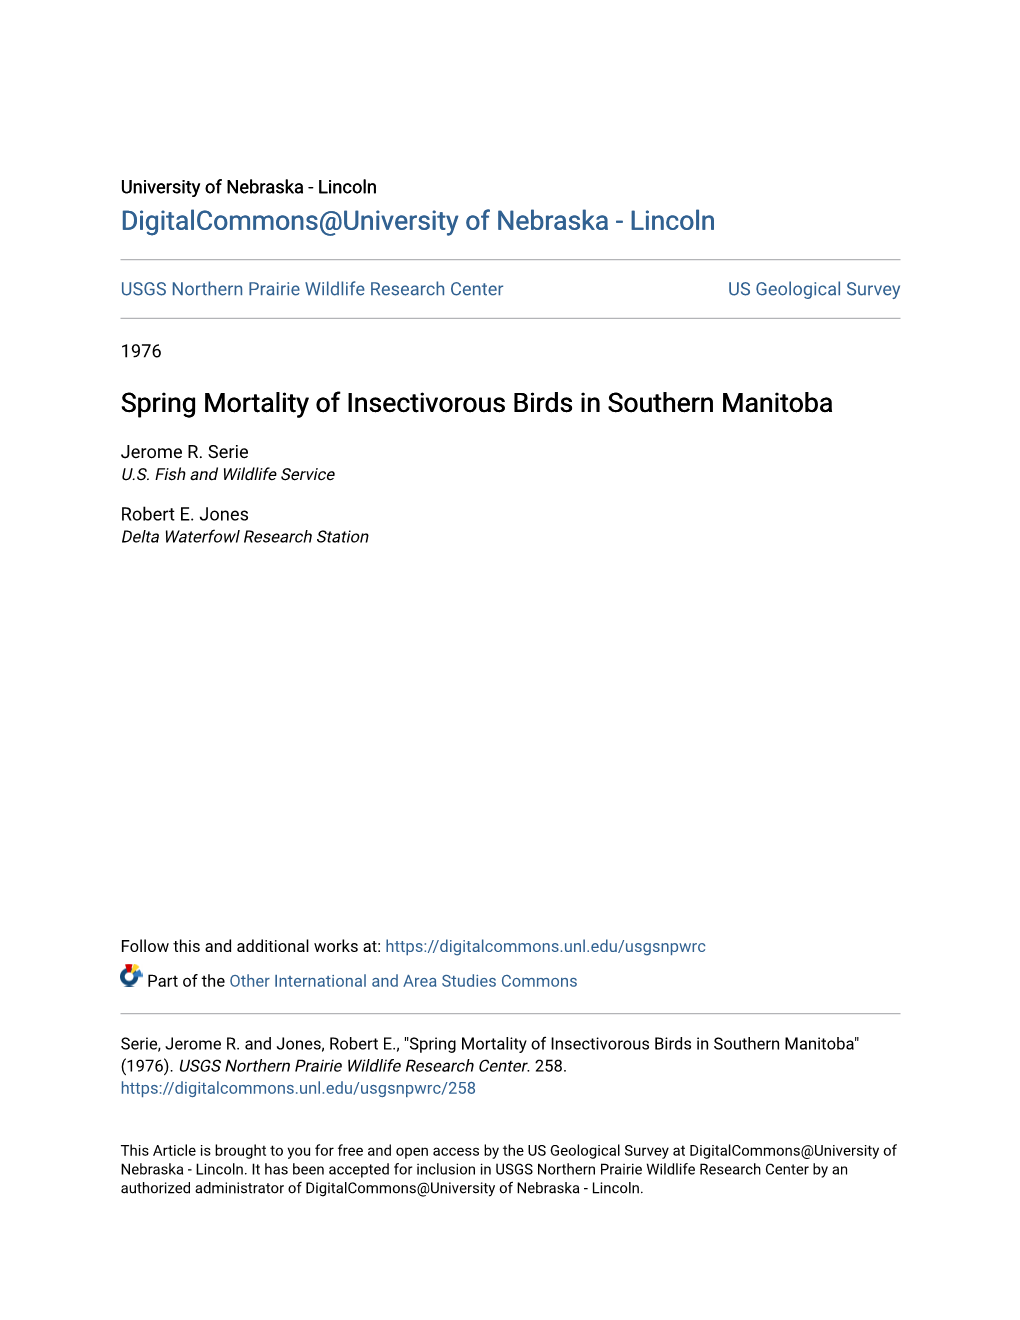 Spring Mortality of Insectivorous Birds in Southern Manitoba